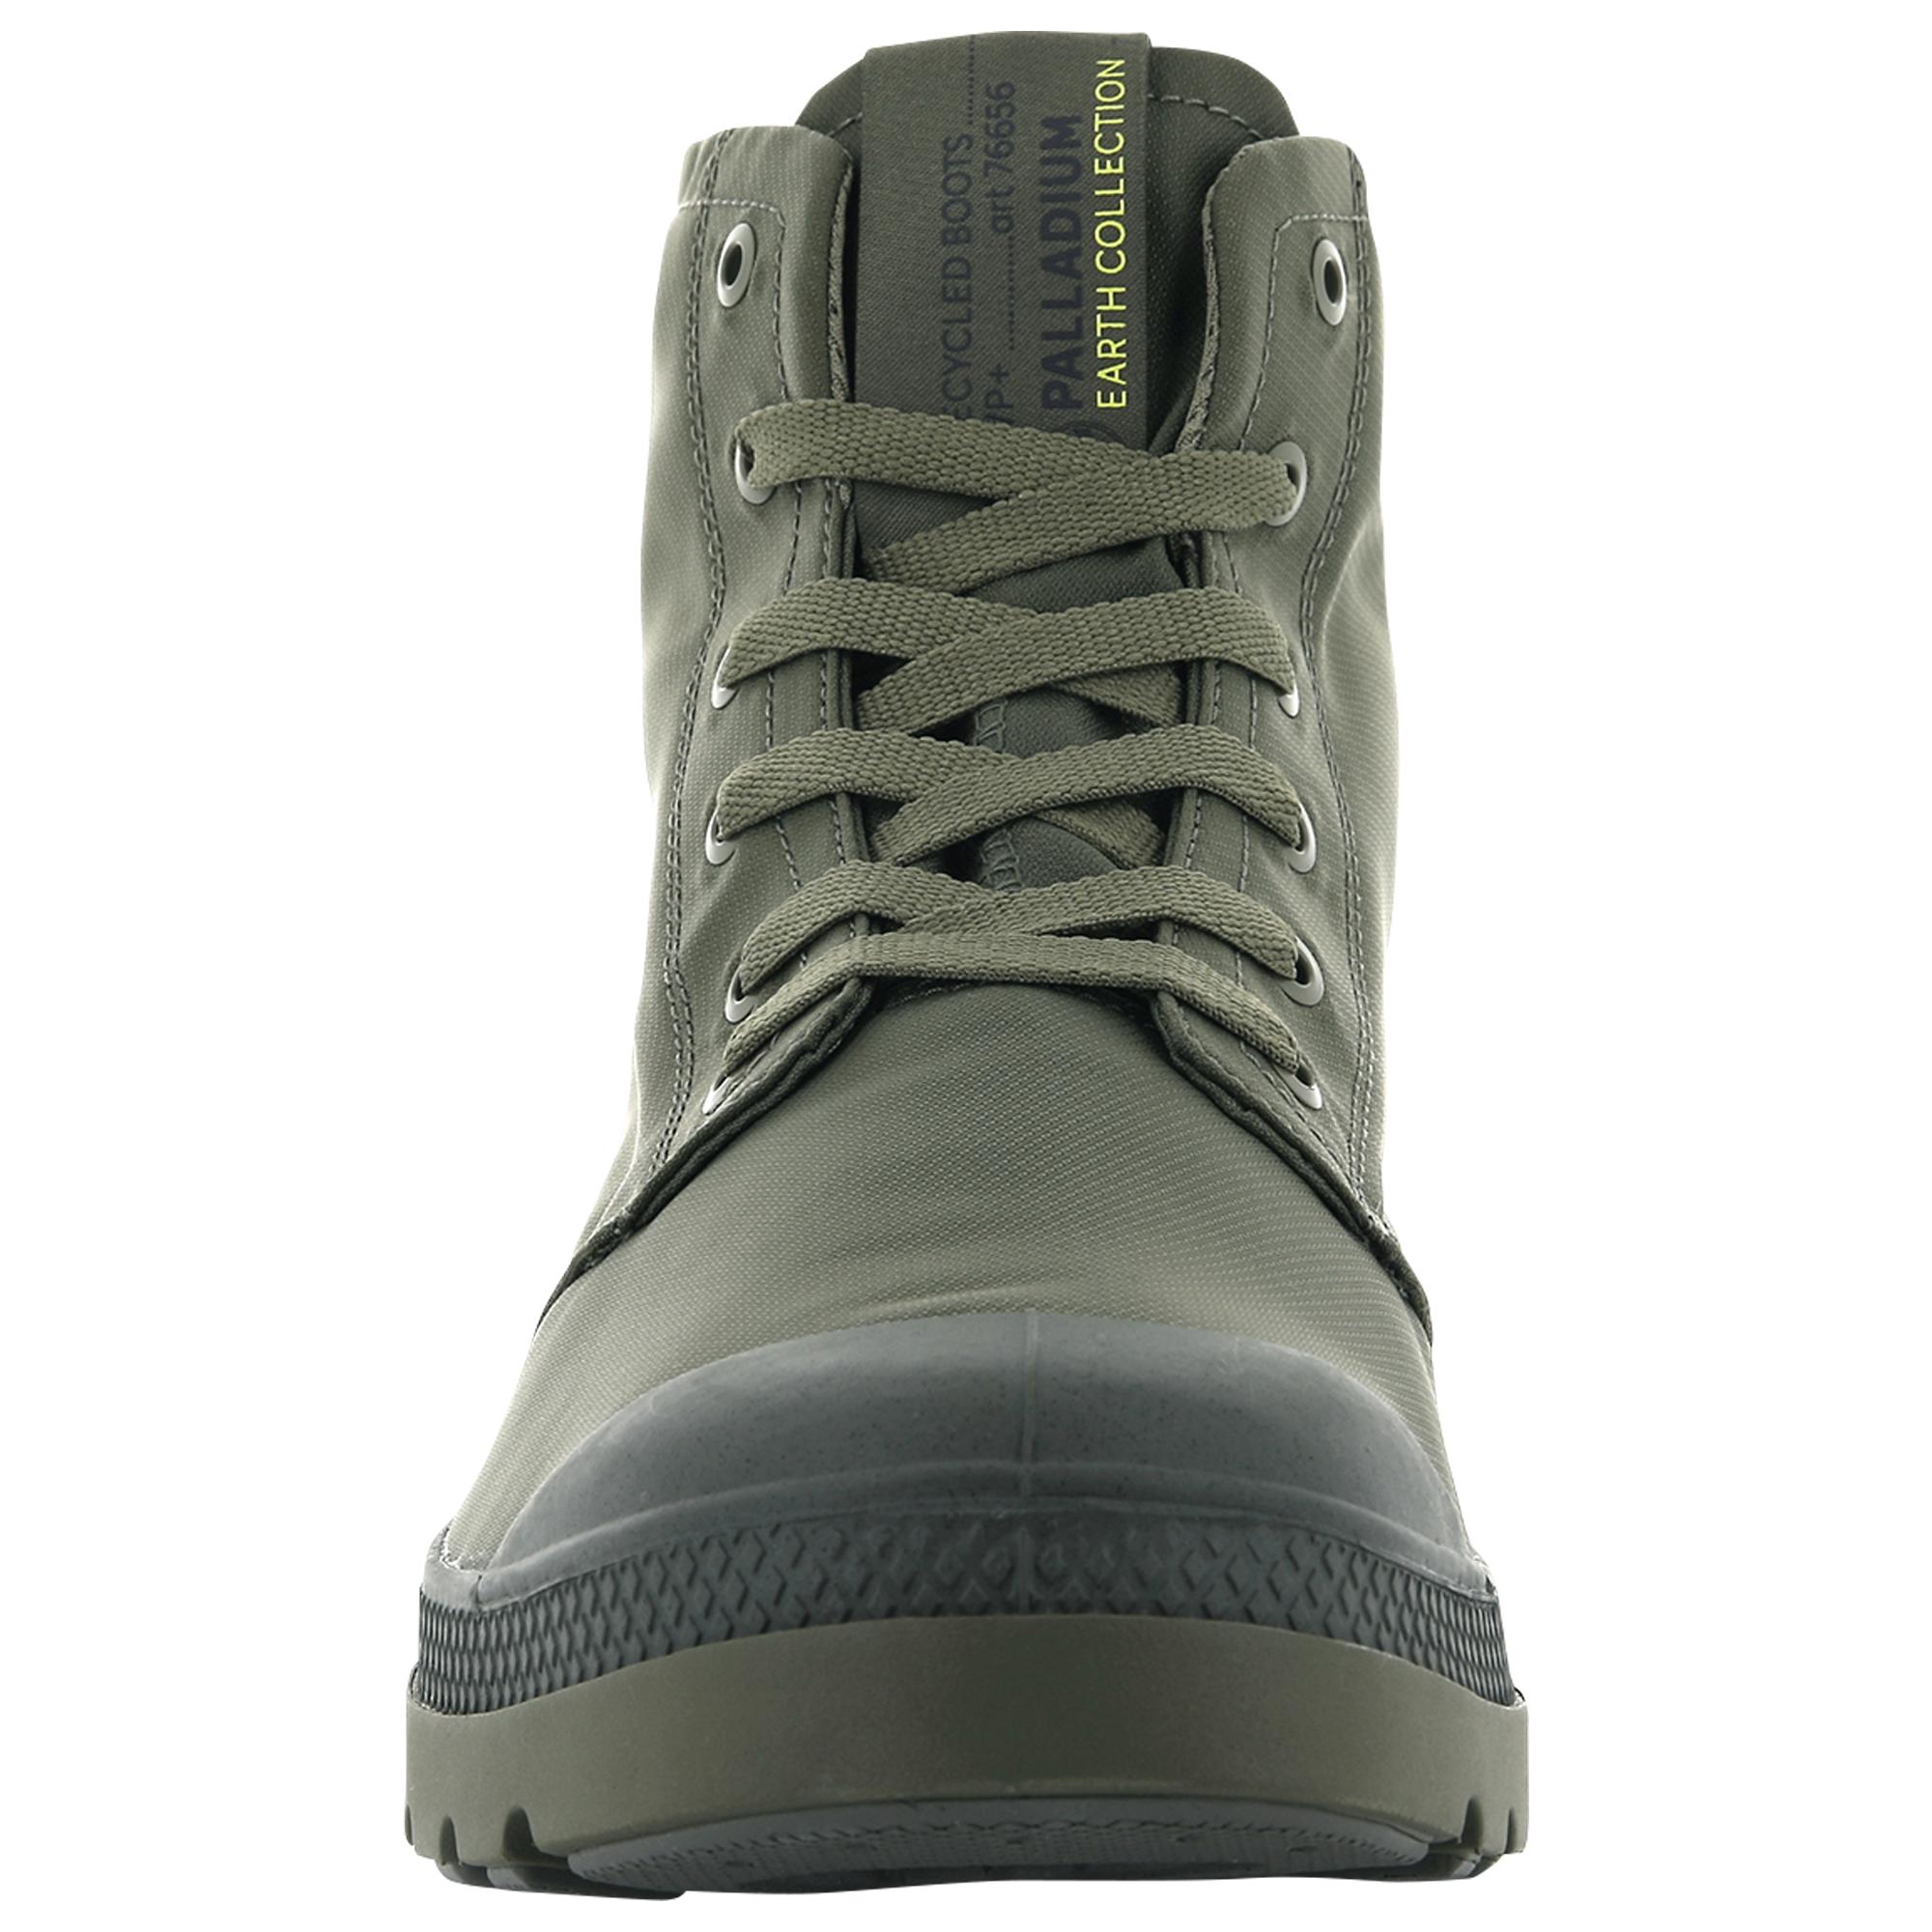 Palladium Rubber Pampa Lite+ Recycle Wp+ - Shoes in Dusky Green/Dusky Green  (Green) for Men - Lyst